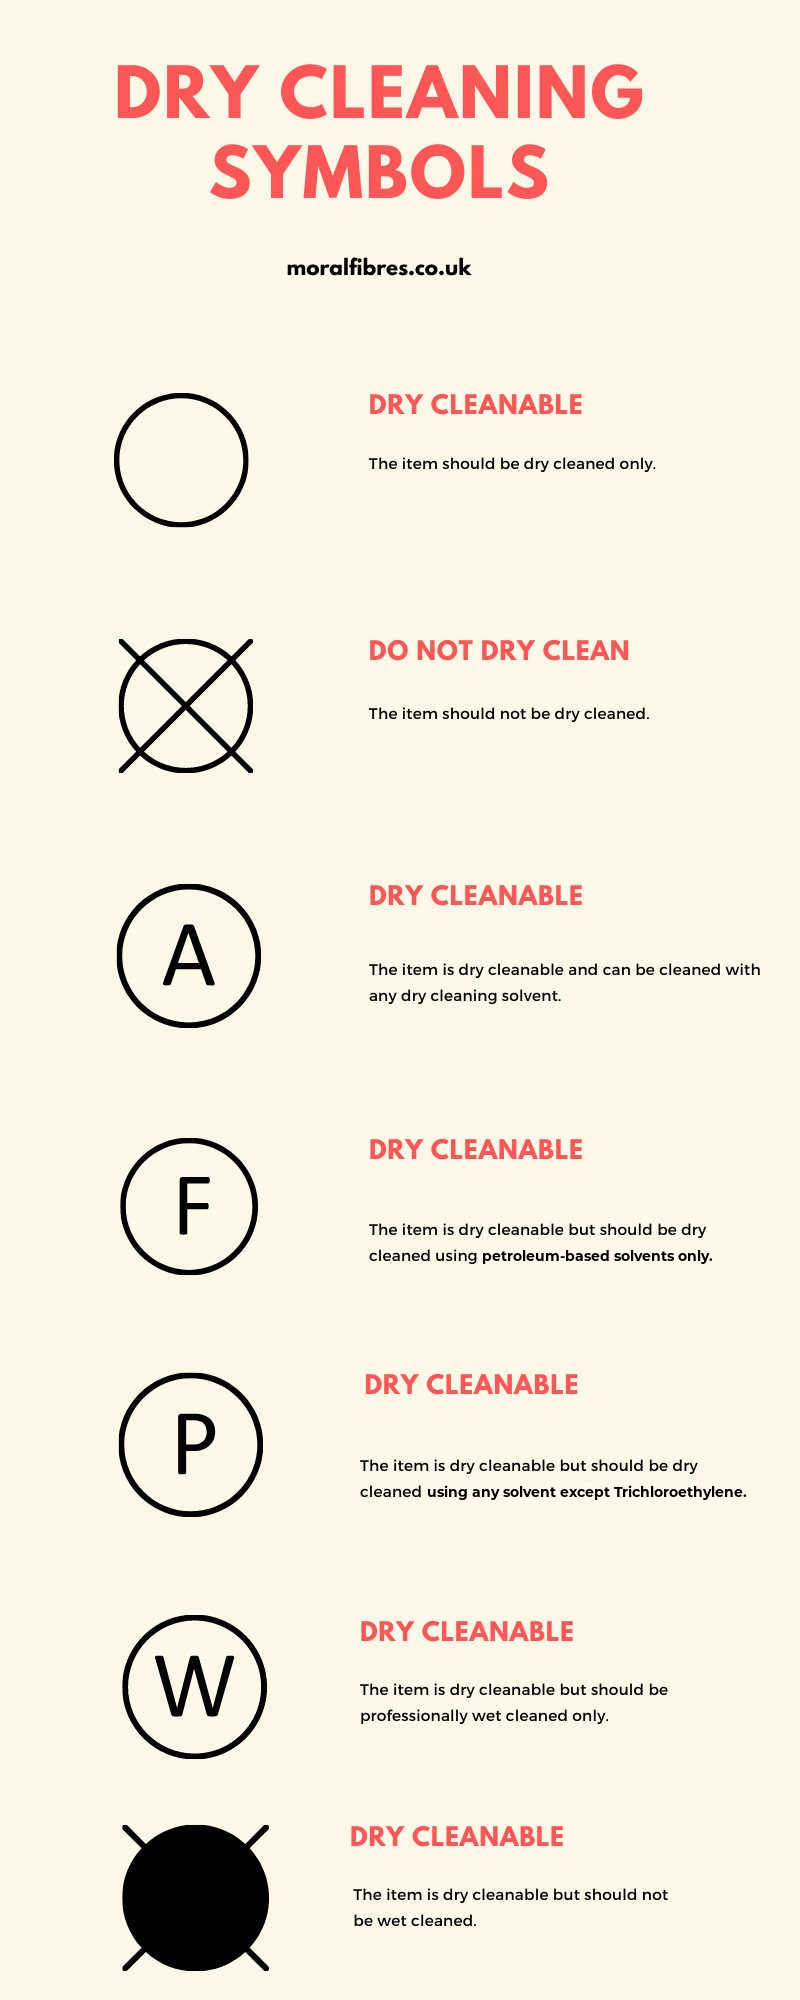 dry cleaning symbols in the uk